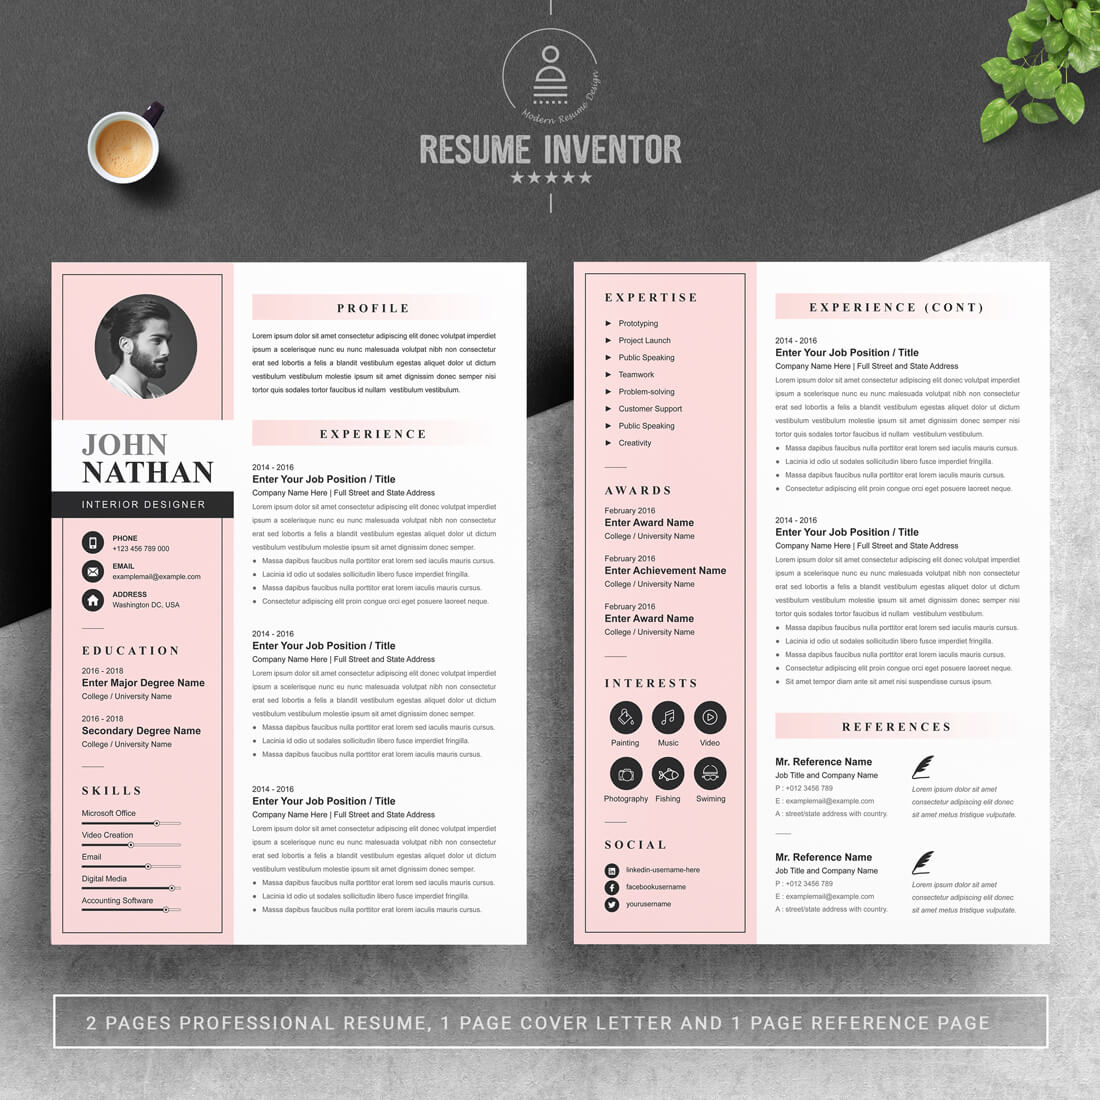 Pink and black resume template with a cup of coffee.